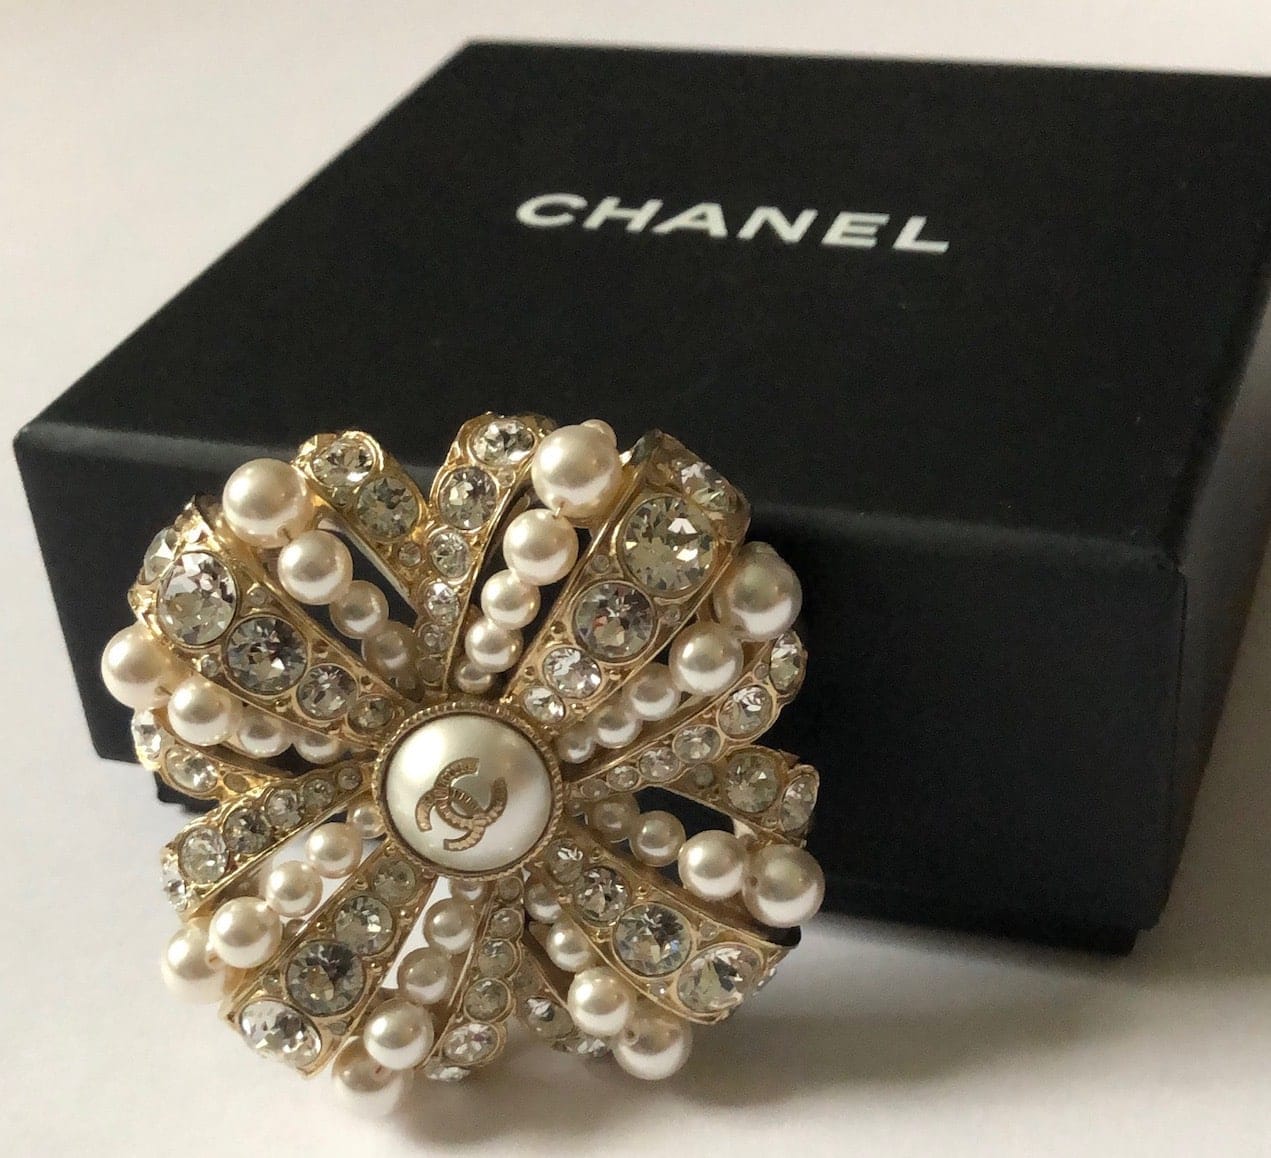 Authentic vintage Chanel pin brooch icon charm bag CC COCO jewelry